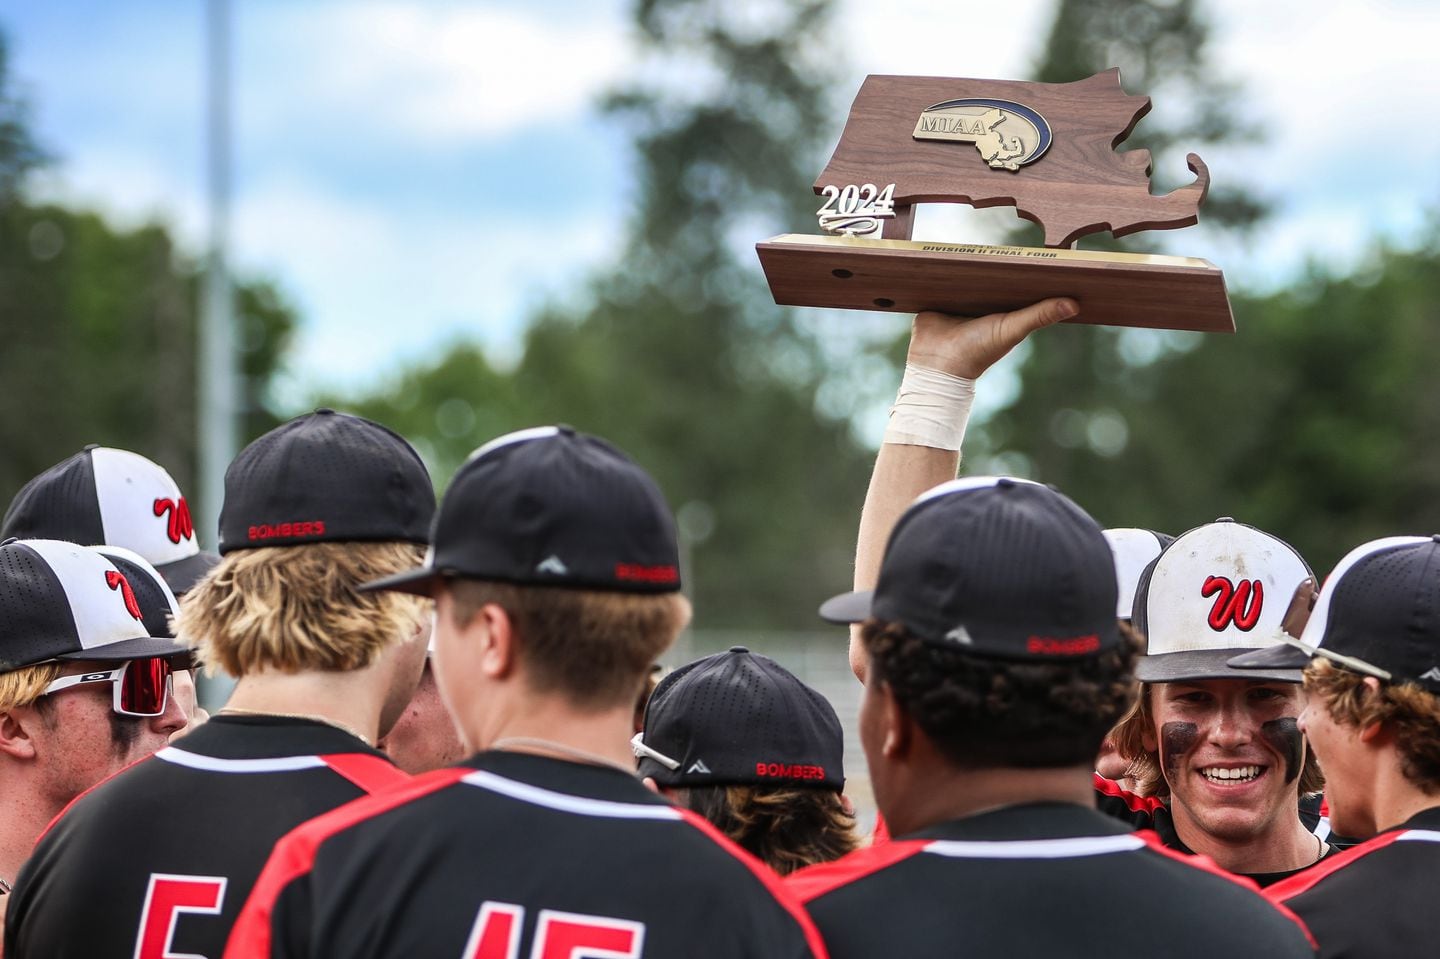 The Westfield High School baseball team celebrates with the Final Four trophy after beating visiting Hopkinton, 7-2, in the MIAA Division 2 quarterfinals on June 10, 2024